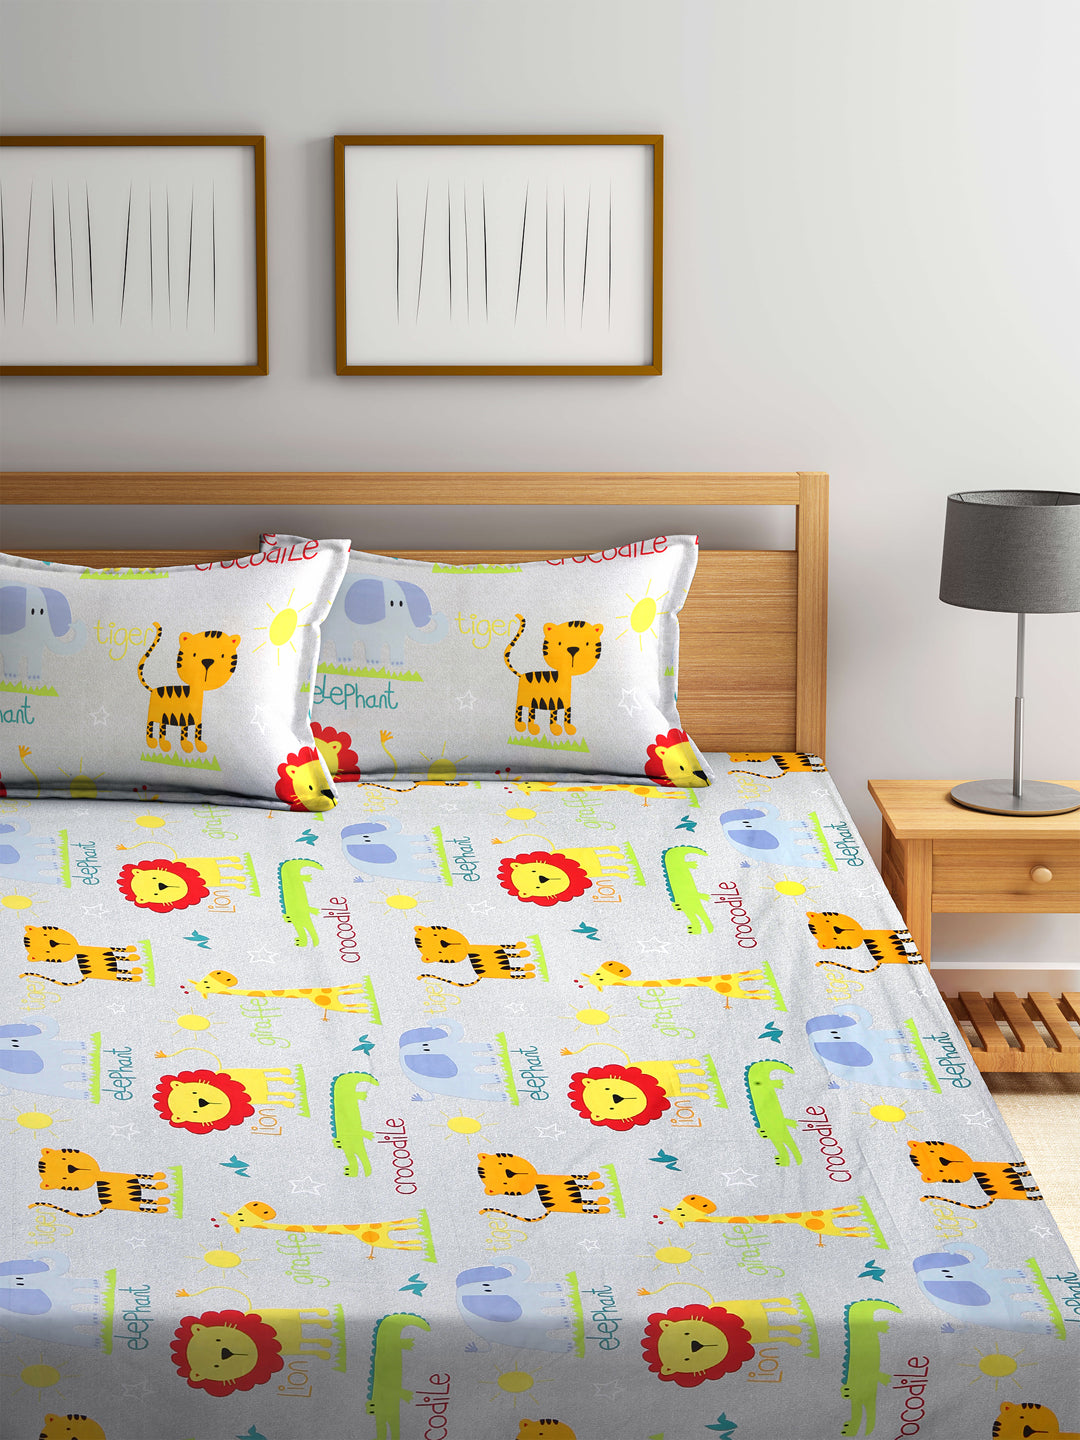 Kid's Special King Size Bed Sheet Set with 2 Pillow Covers by Arrabi® (250 x 220 cm)